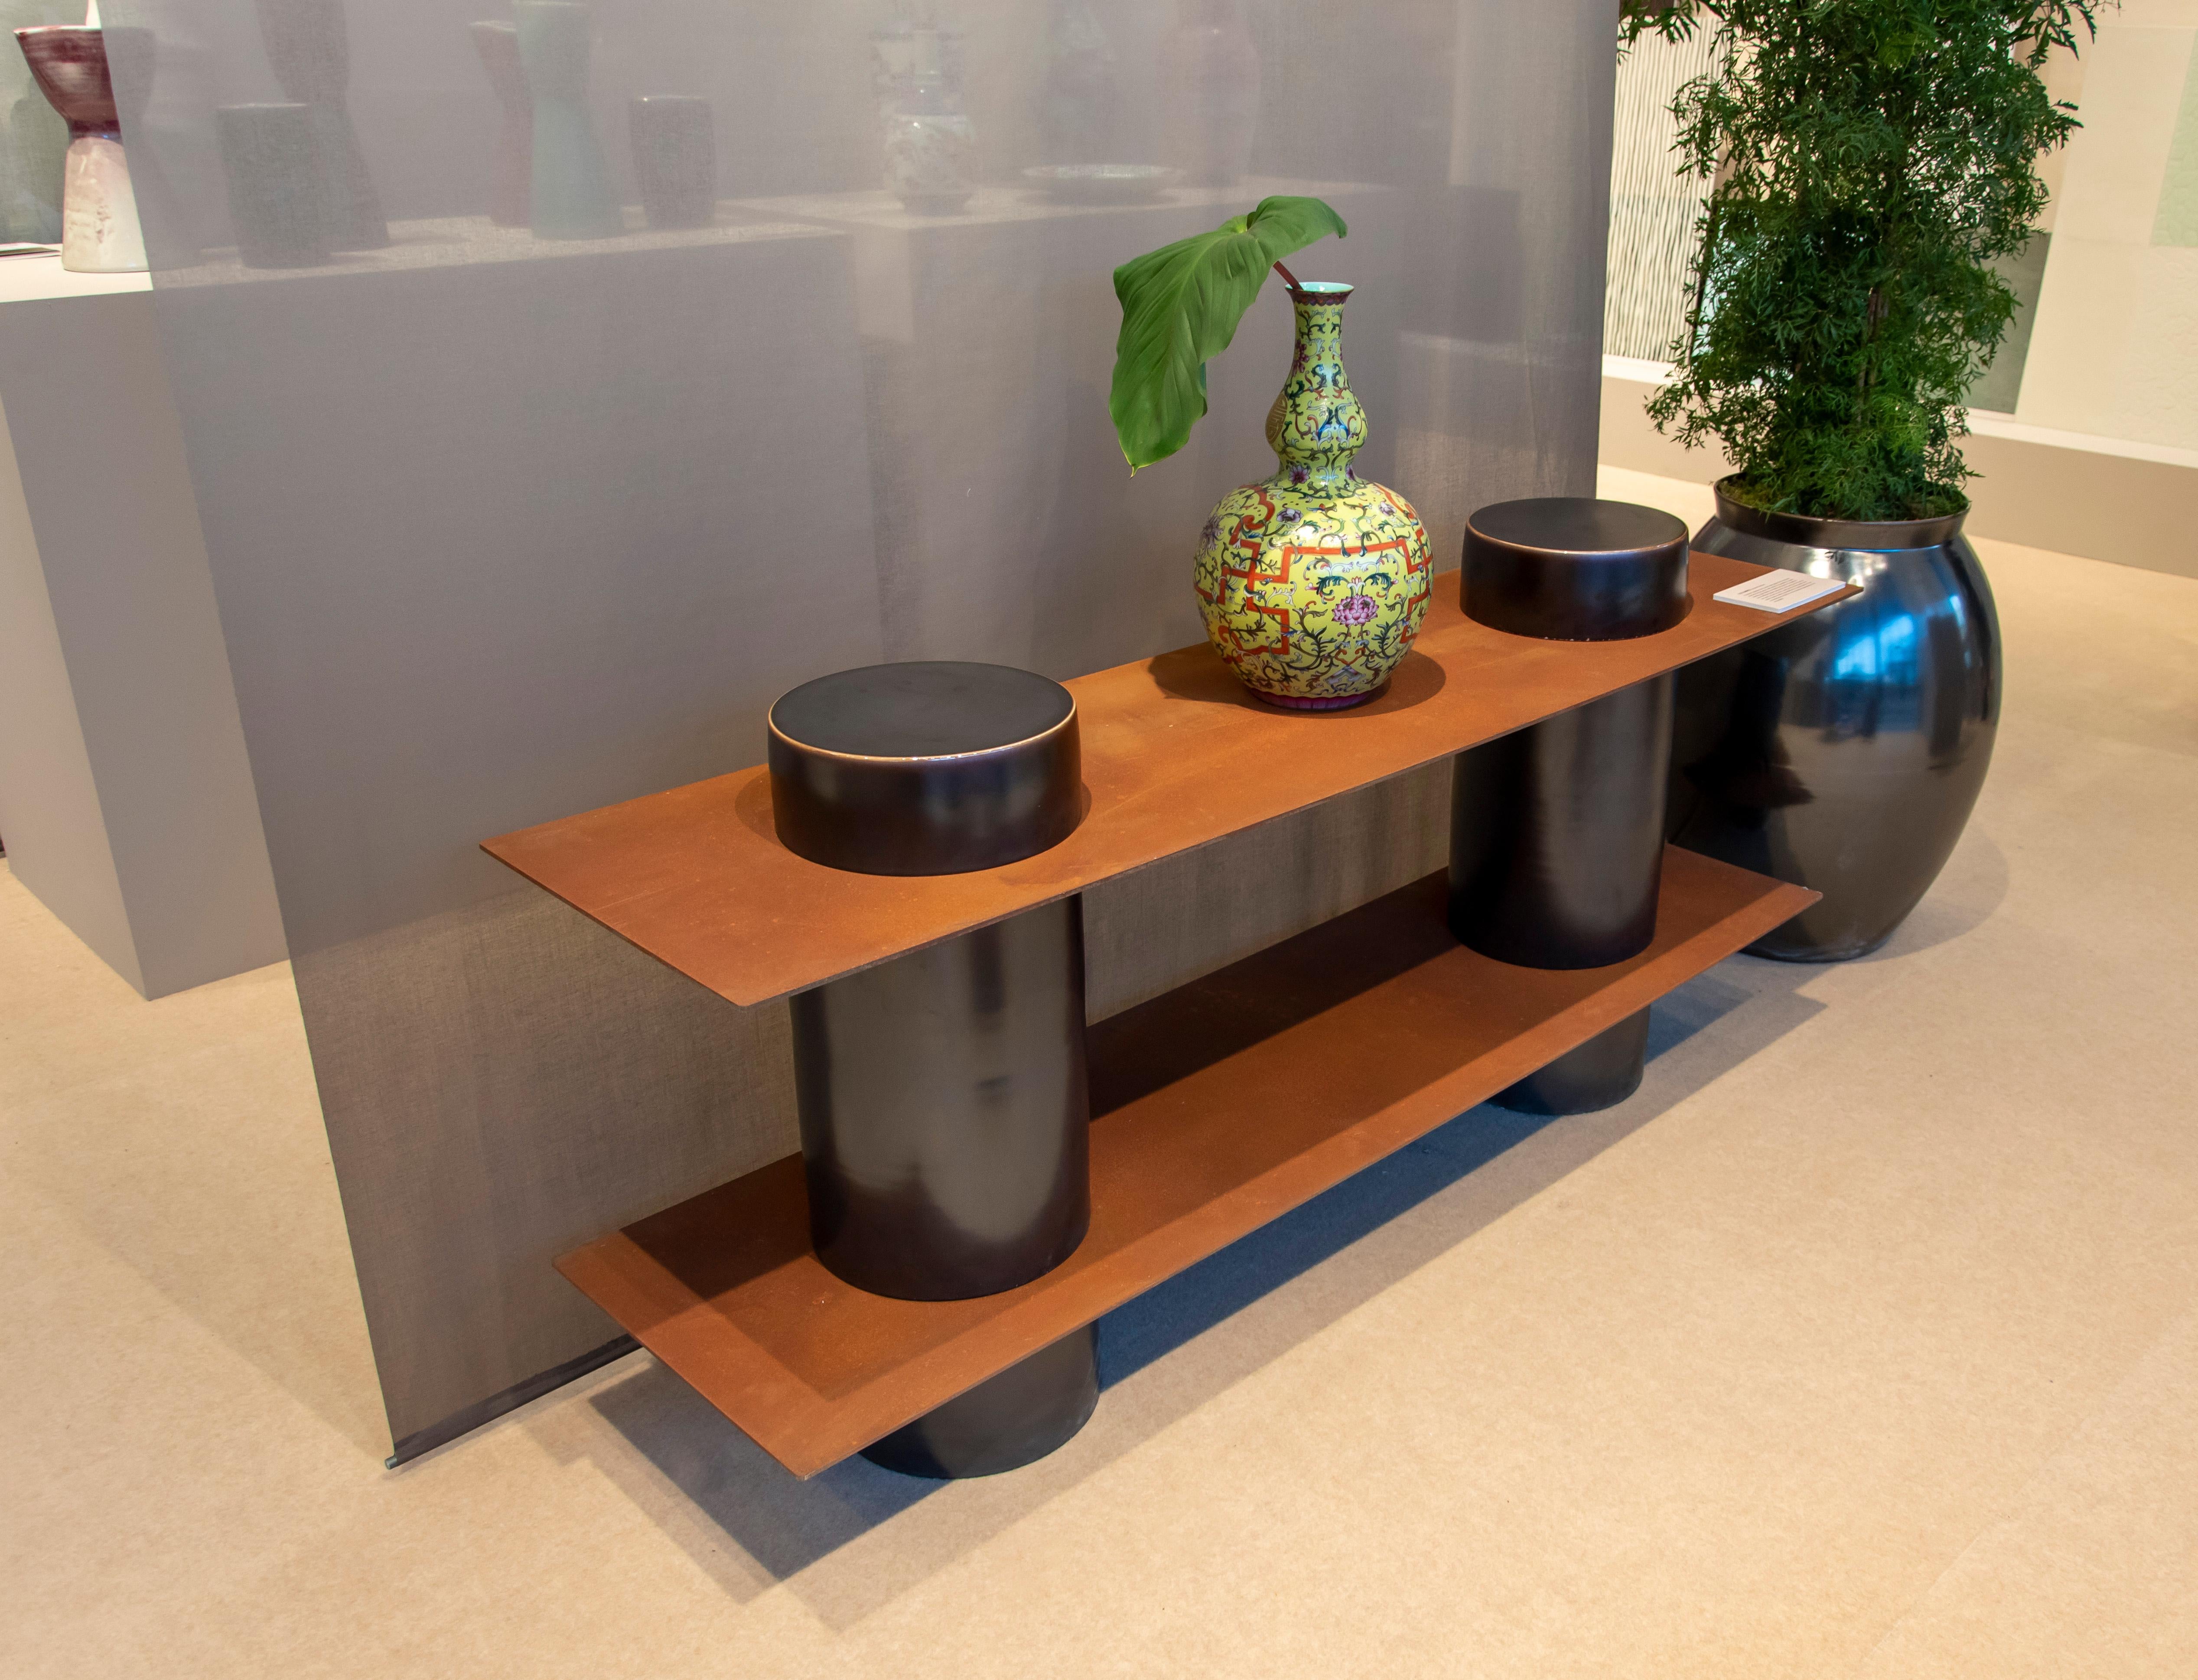 Column '2 lev' Contemporary Shelf in Porcelain and Corten Steel In New Condition For Sale In London, GB